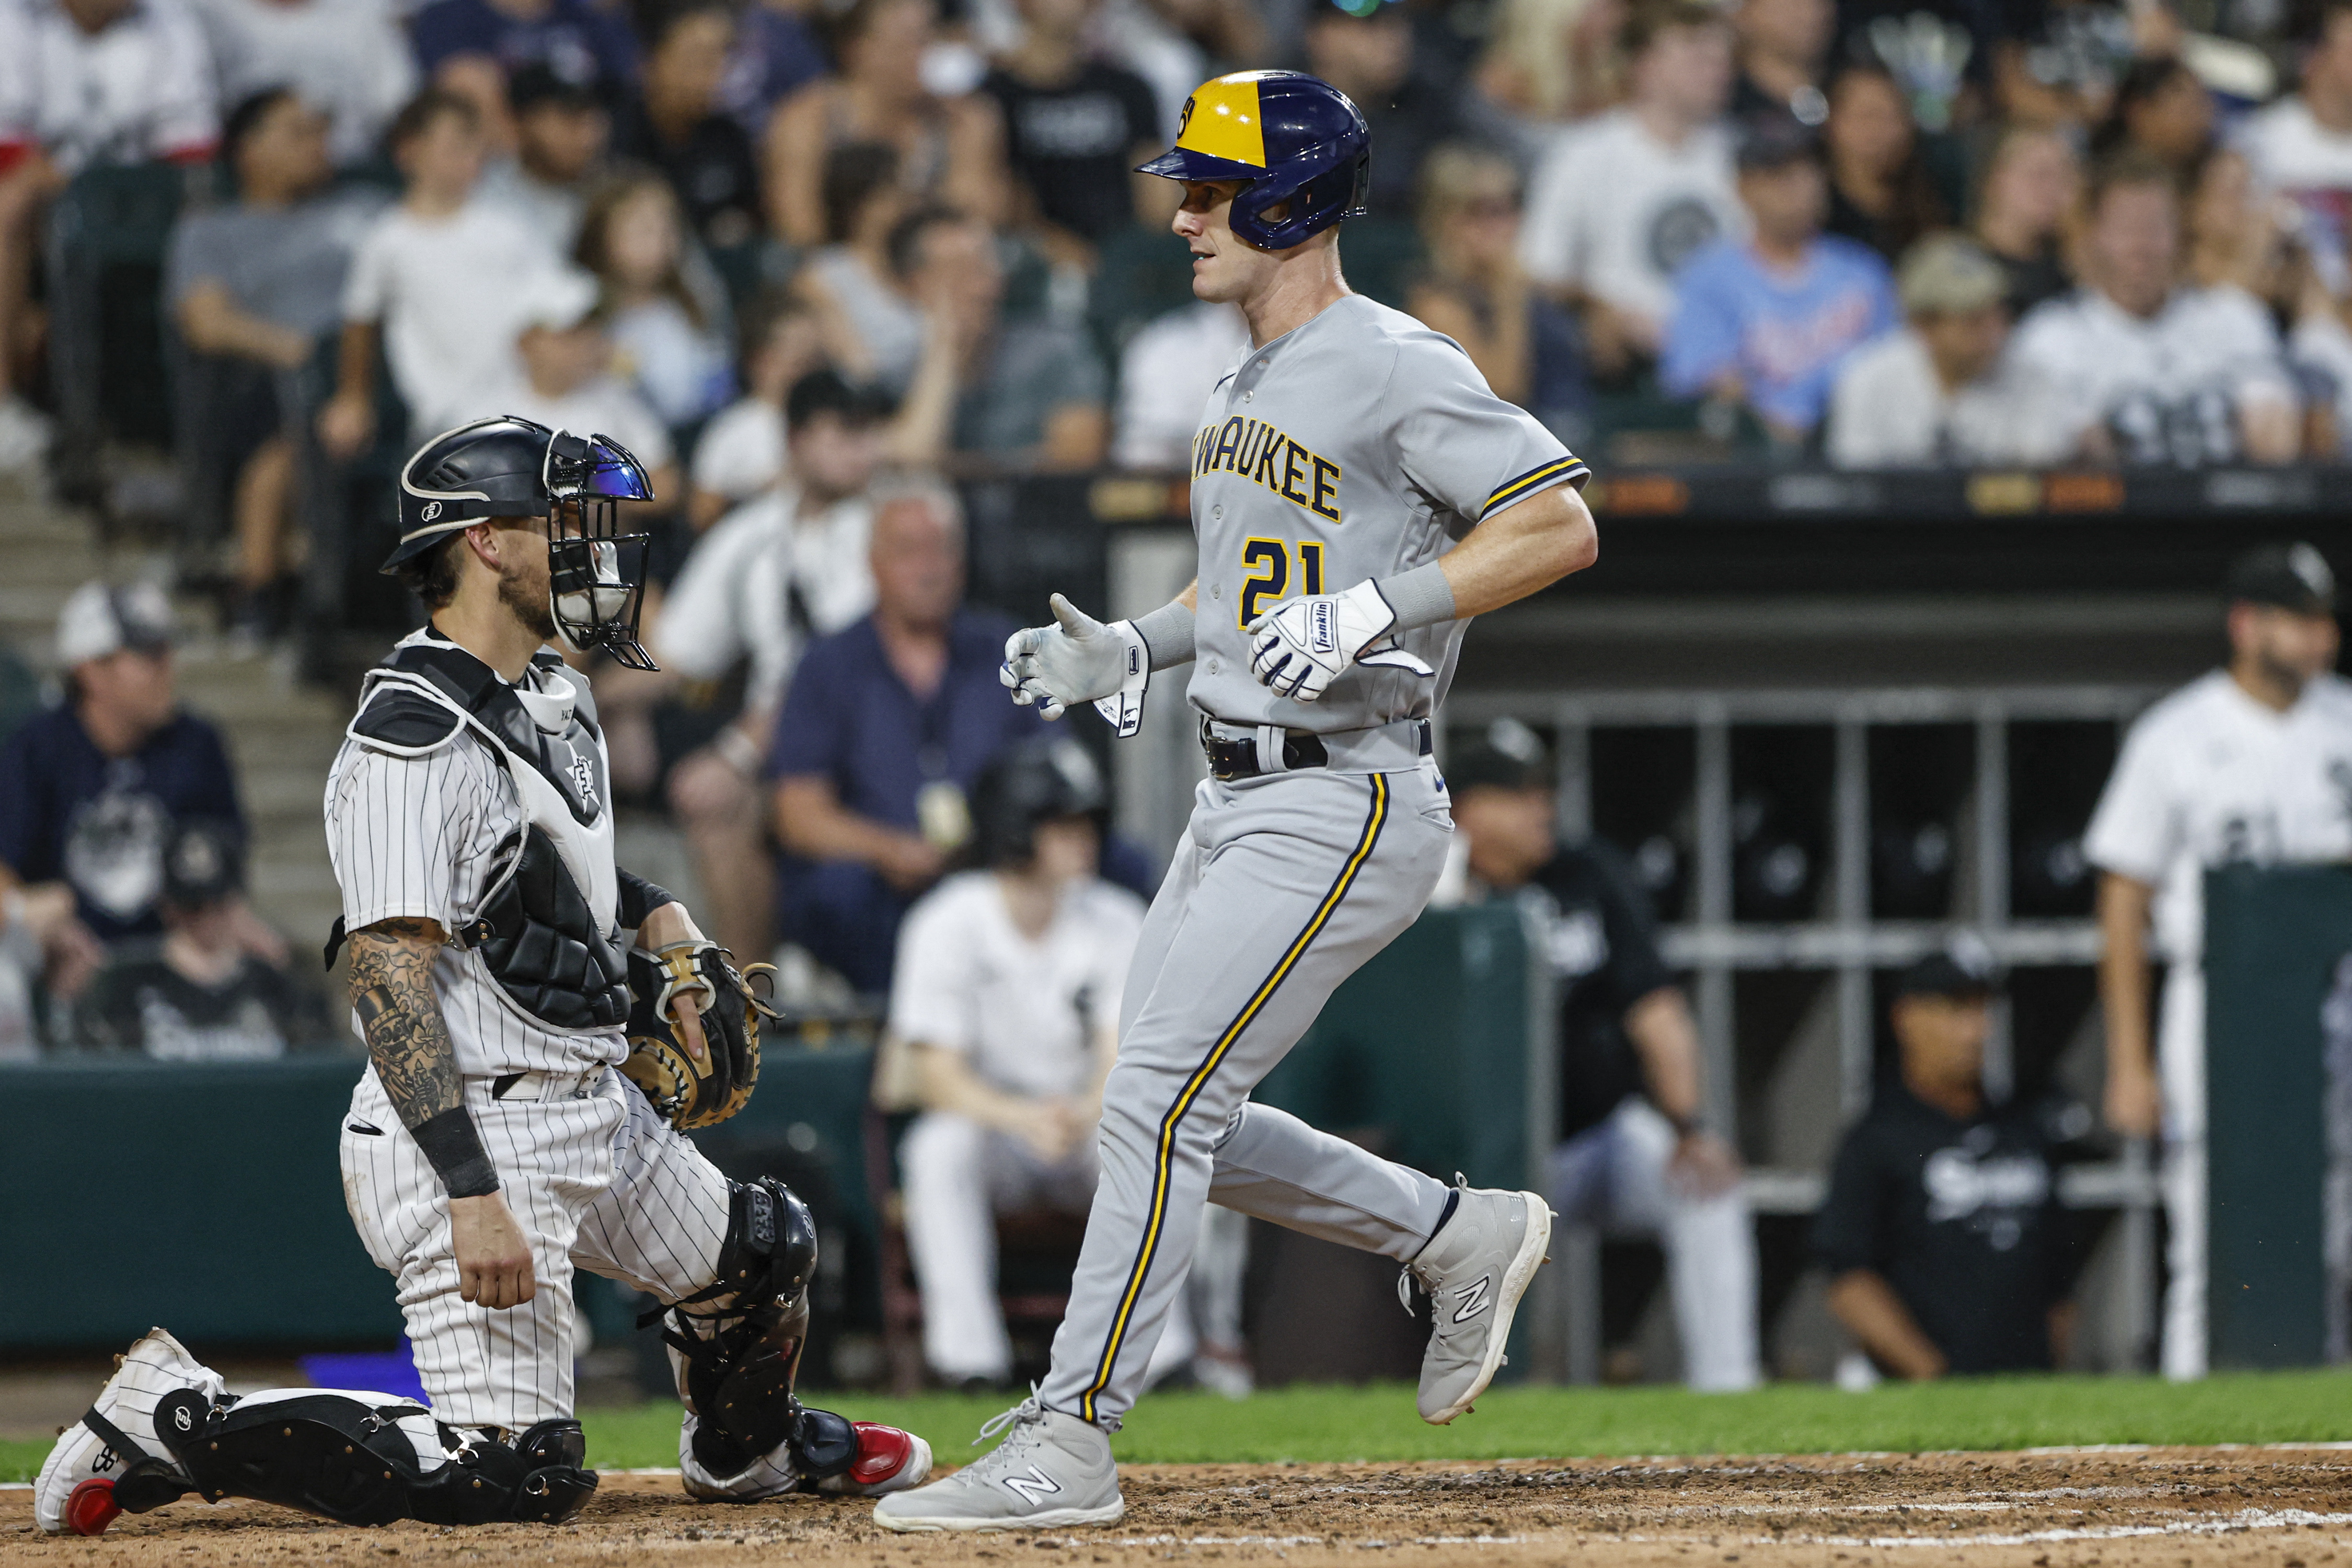 Brewers rally for 3-2 win over White Sox - Brew Crew Ball